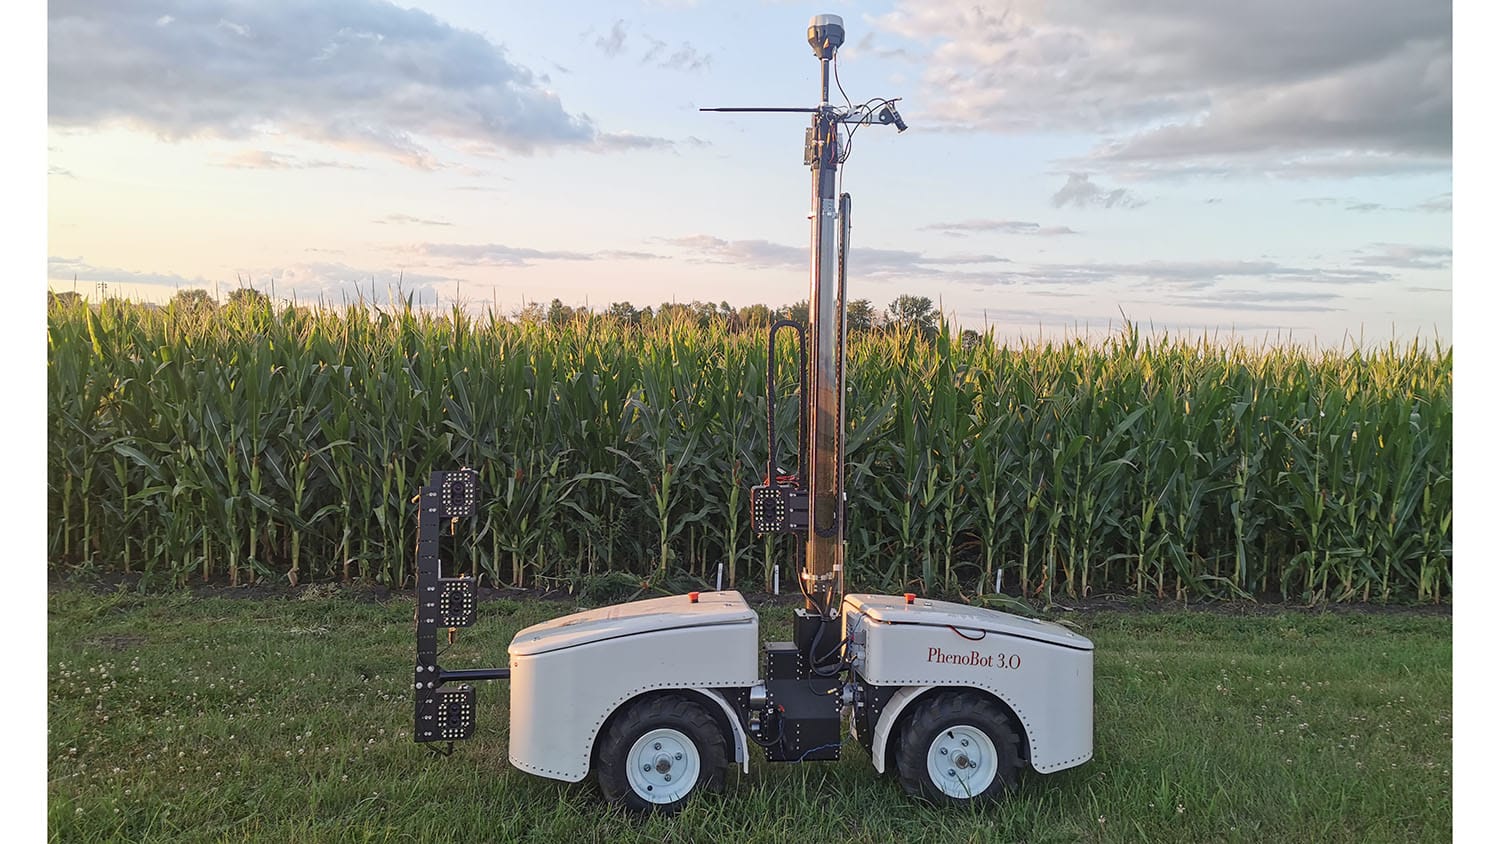 White four-wheeled box-like robot with vertical camera mount in the middle. Robot is in front of a large field of mature corn. A late in the day sunset is behind a partly cloudy sky in the background.